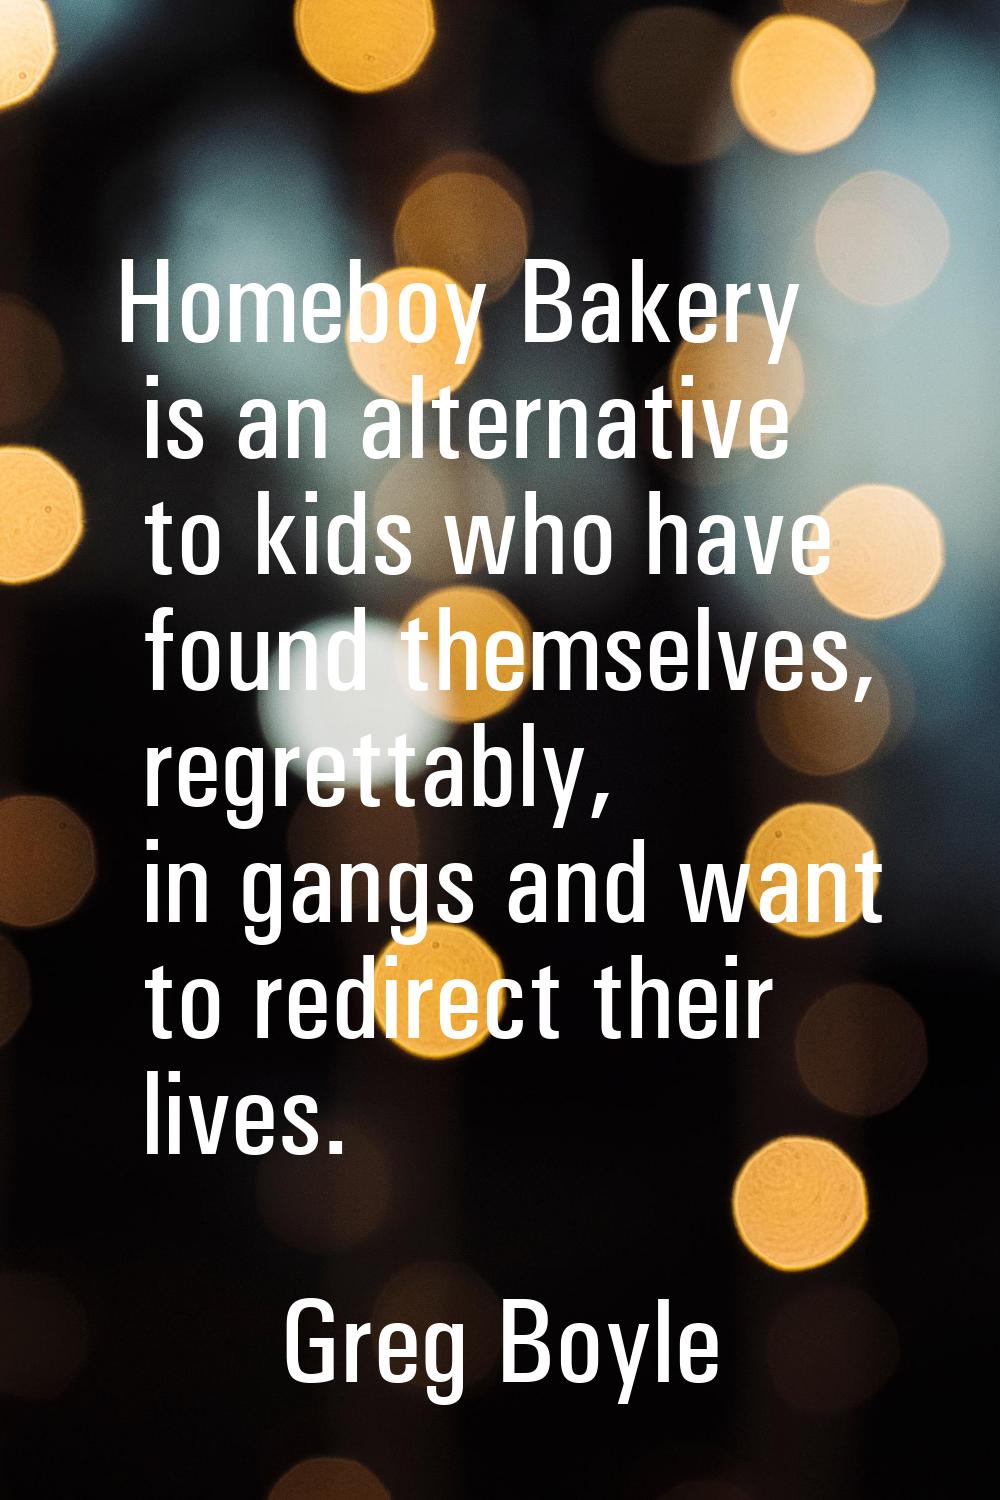 Homeboy Bakery is an alternative to kids who have found themselves, regrettably, in gangs and want 